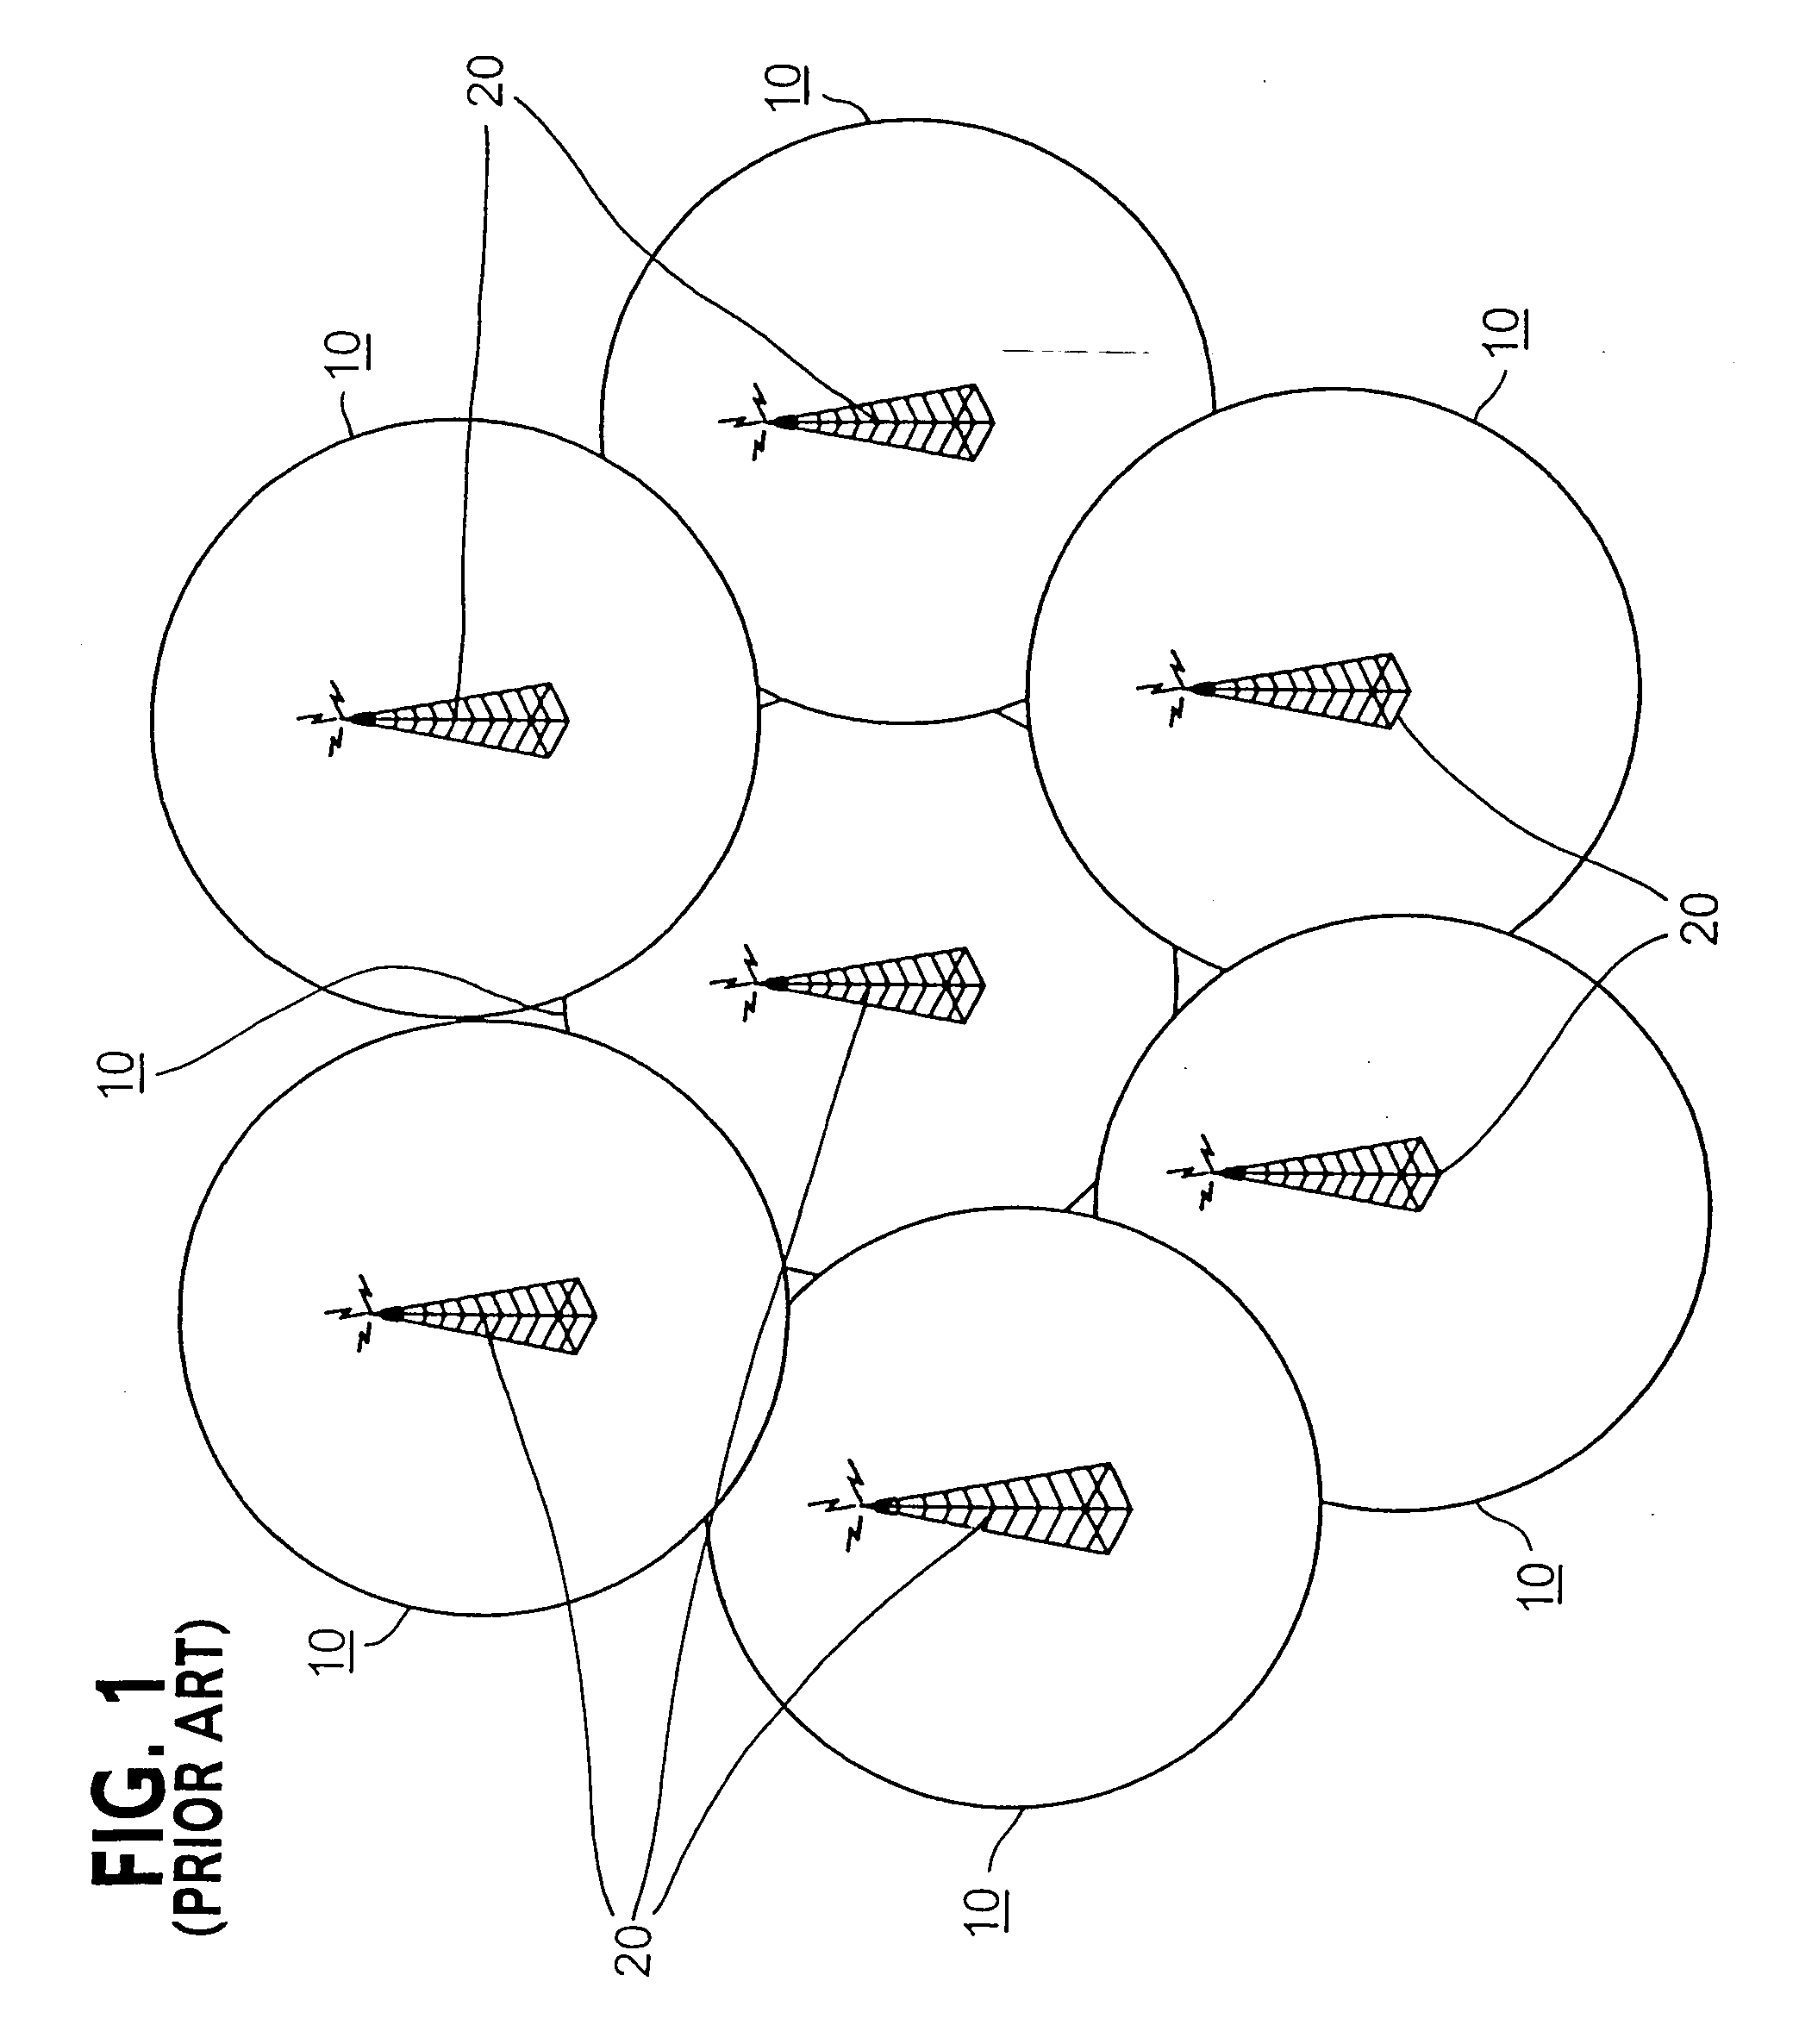 System and method for dynamic frequency allocation for packet switched services